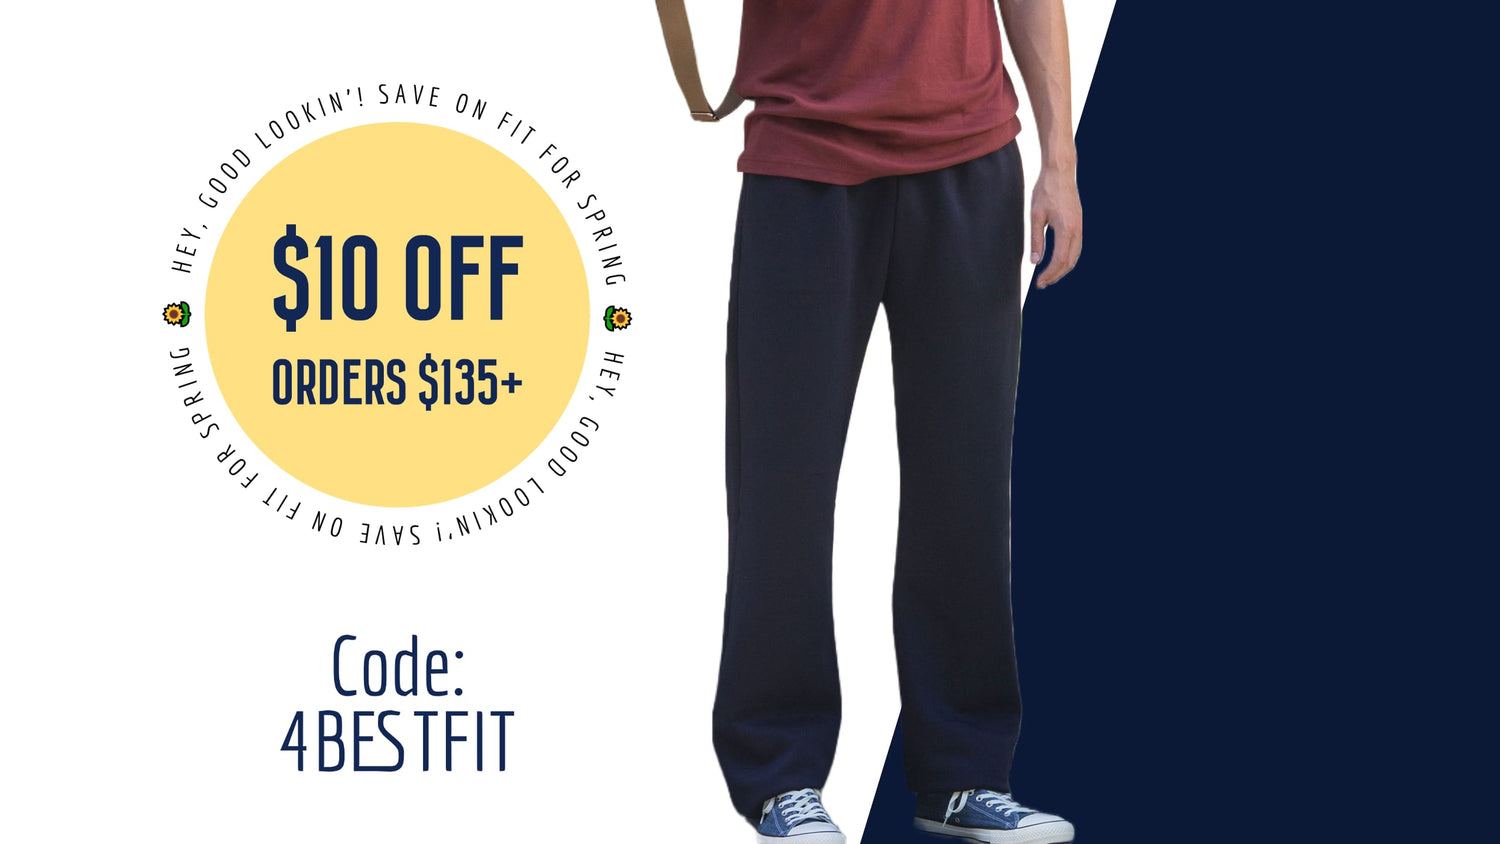 Tall and Short Men's Sweatpants. Tall Men's Jogger Pants. Short Men's Athletic Pants. Short Lengths. Tall and Extra Tall Lengths. Relaxed or Slim Fit.  Sweatopants in every size are ON SALE NOW at FORtheFIT